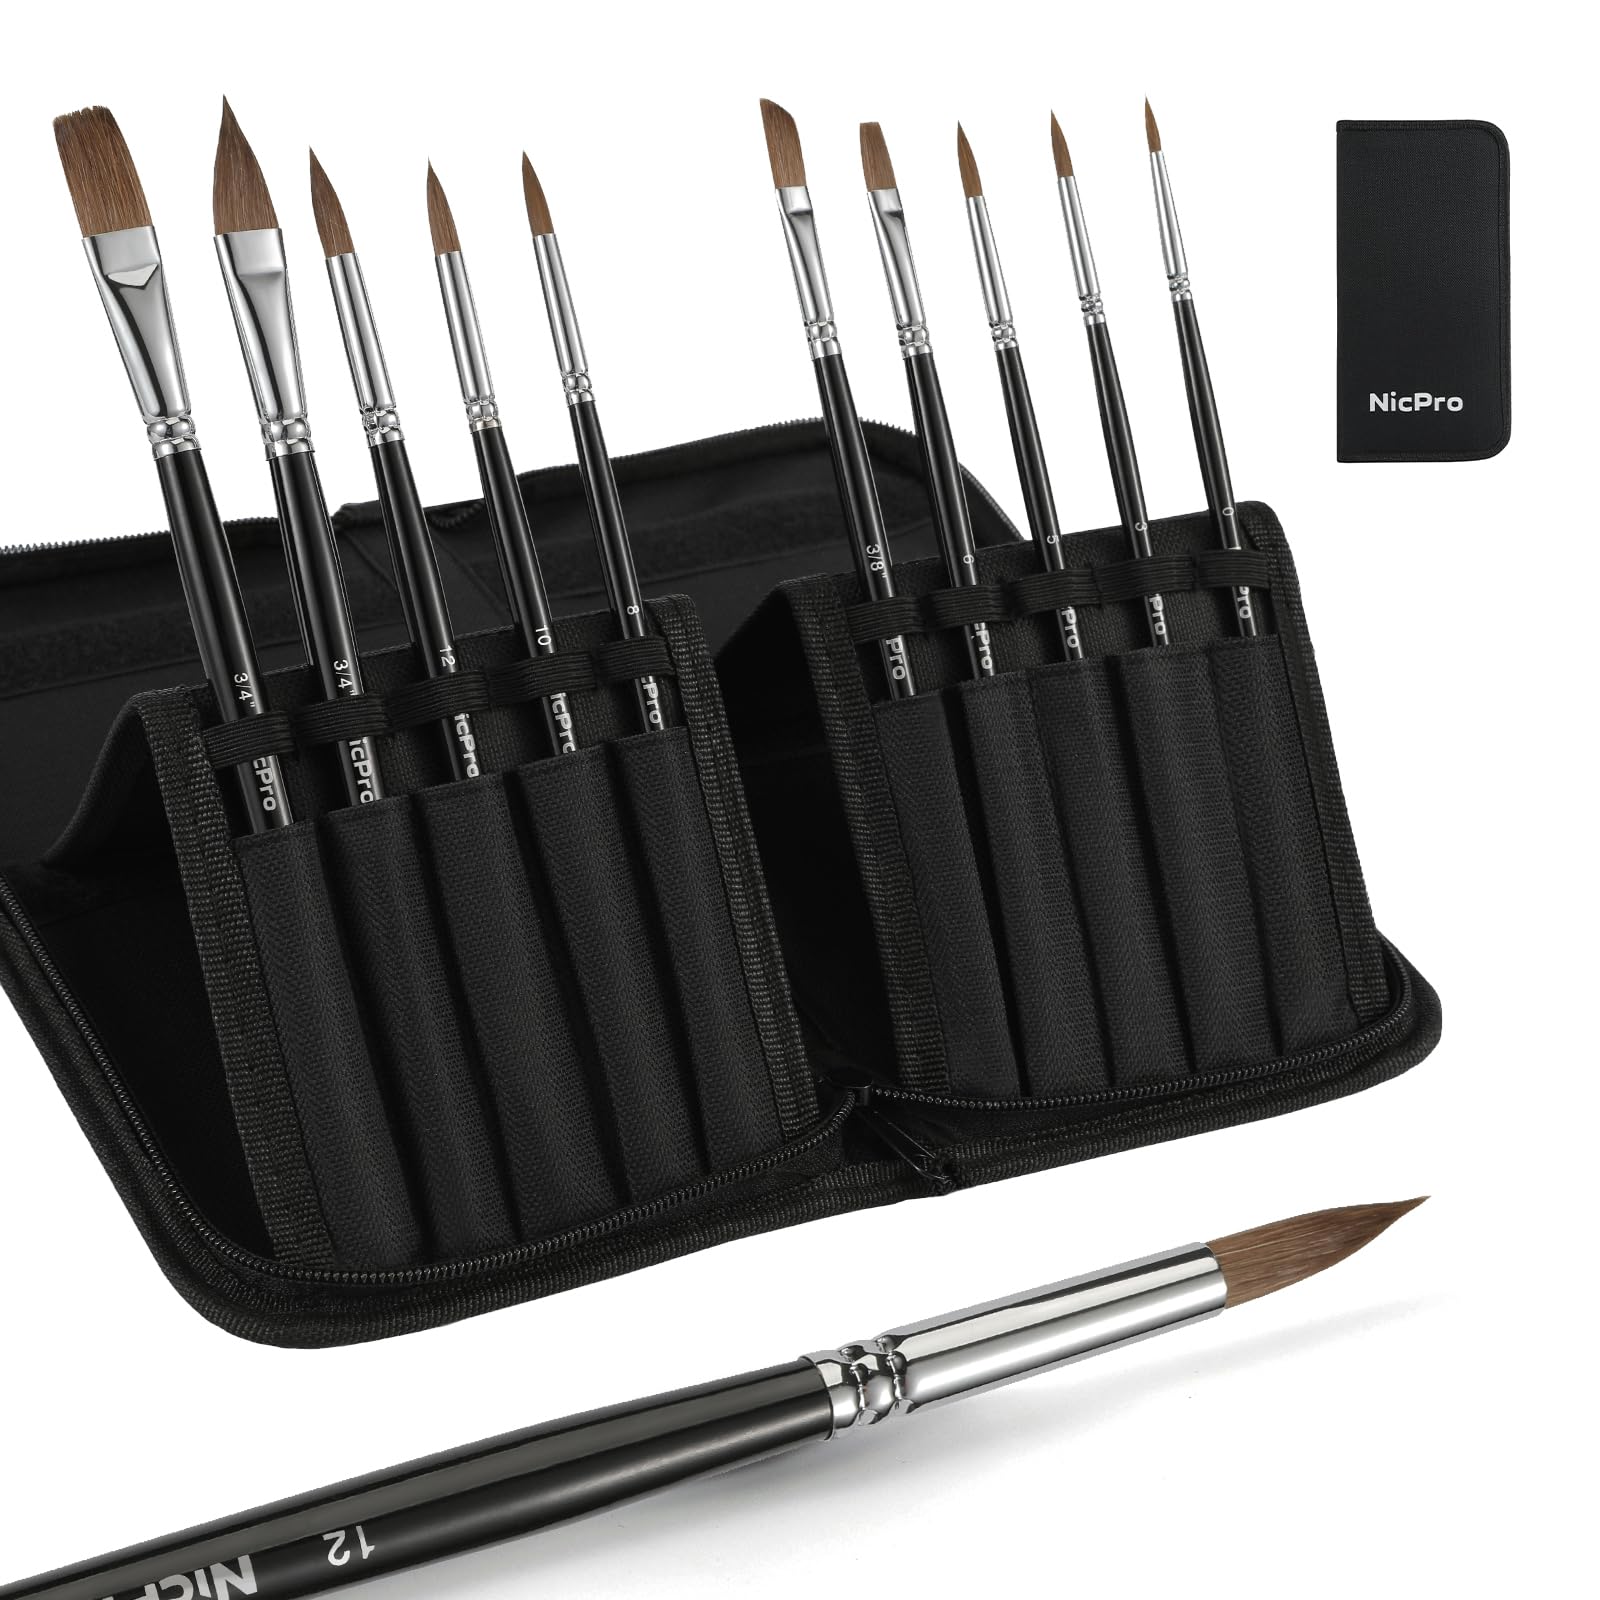 Nicpro 15 PCS Professional Watercolor Paint Brushes Set, Artist Squirr